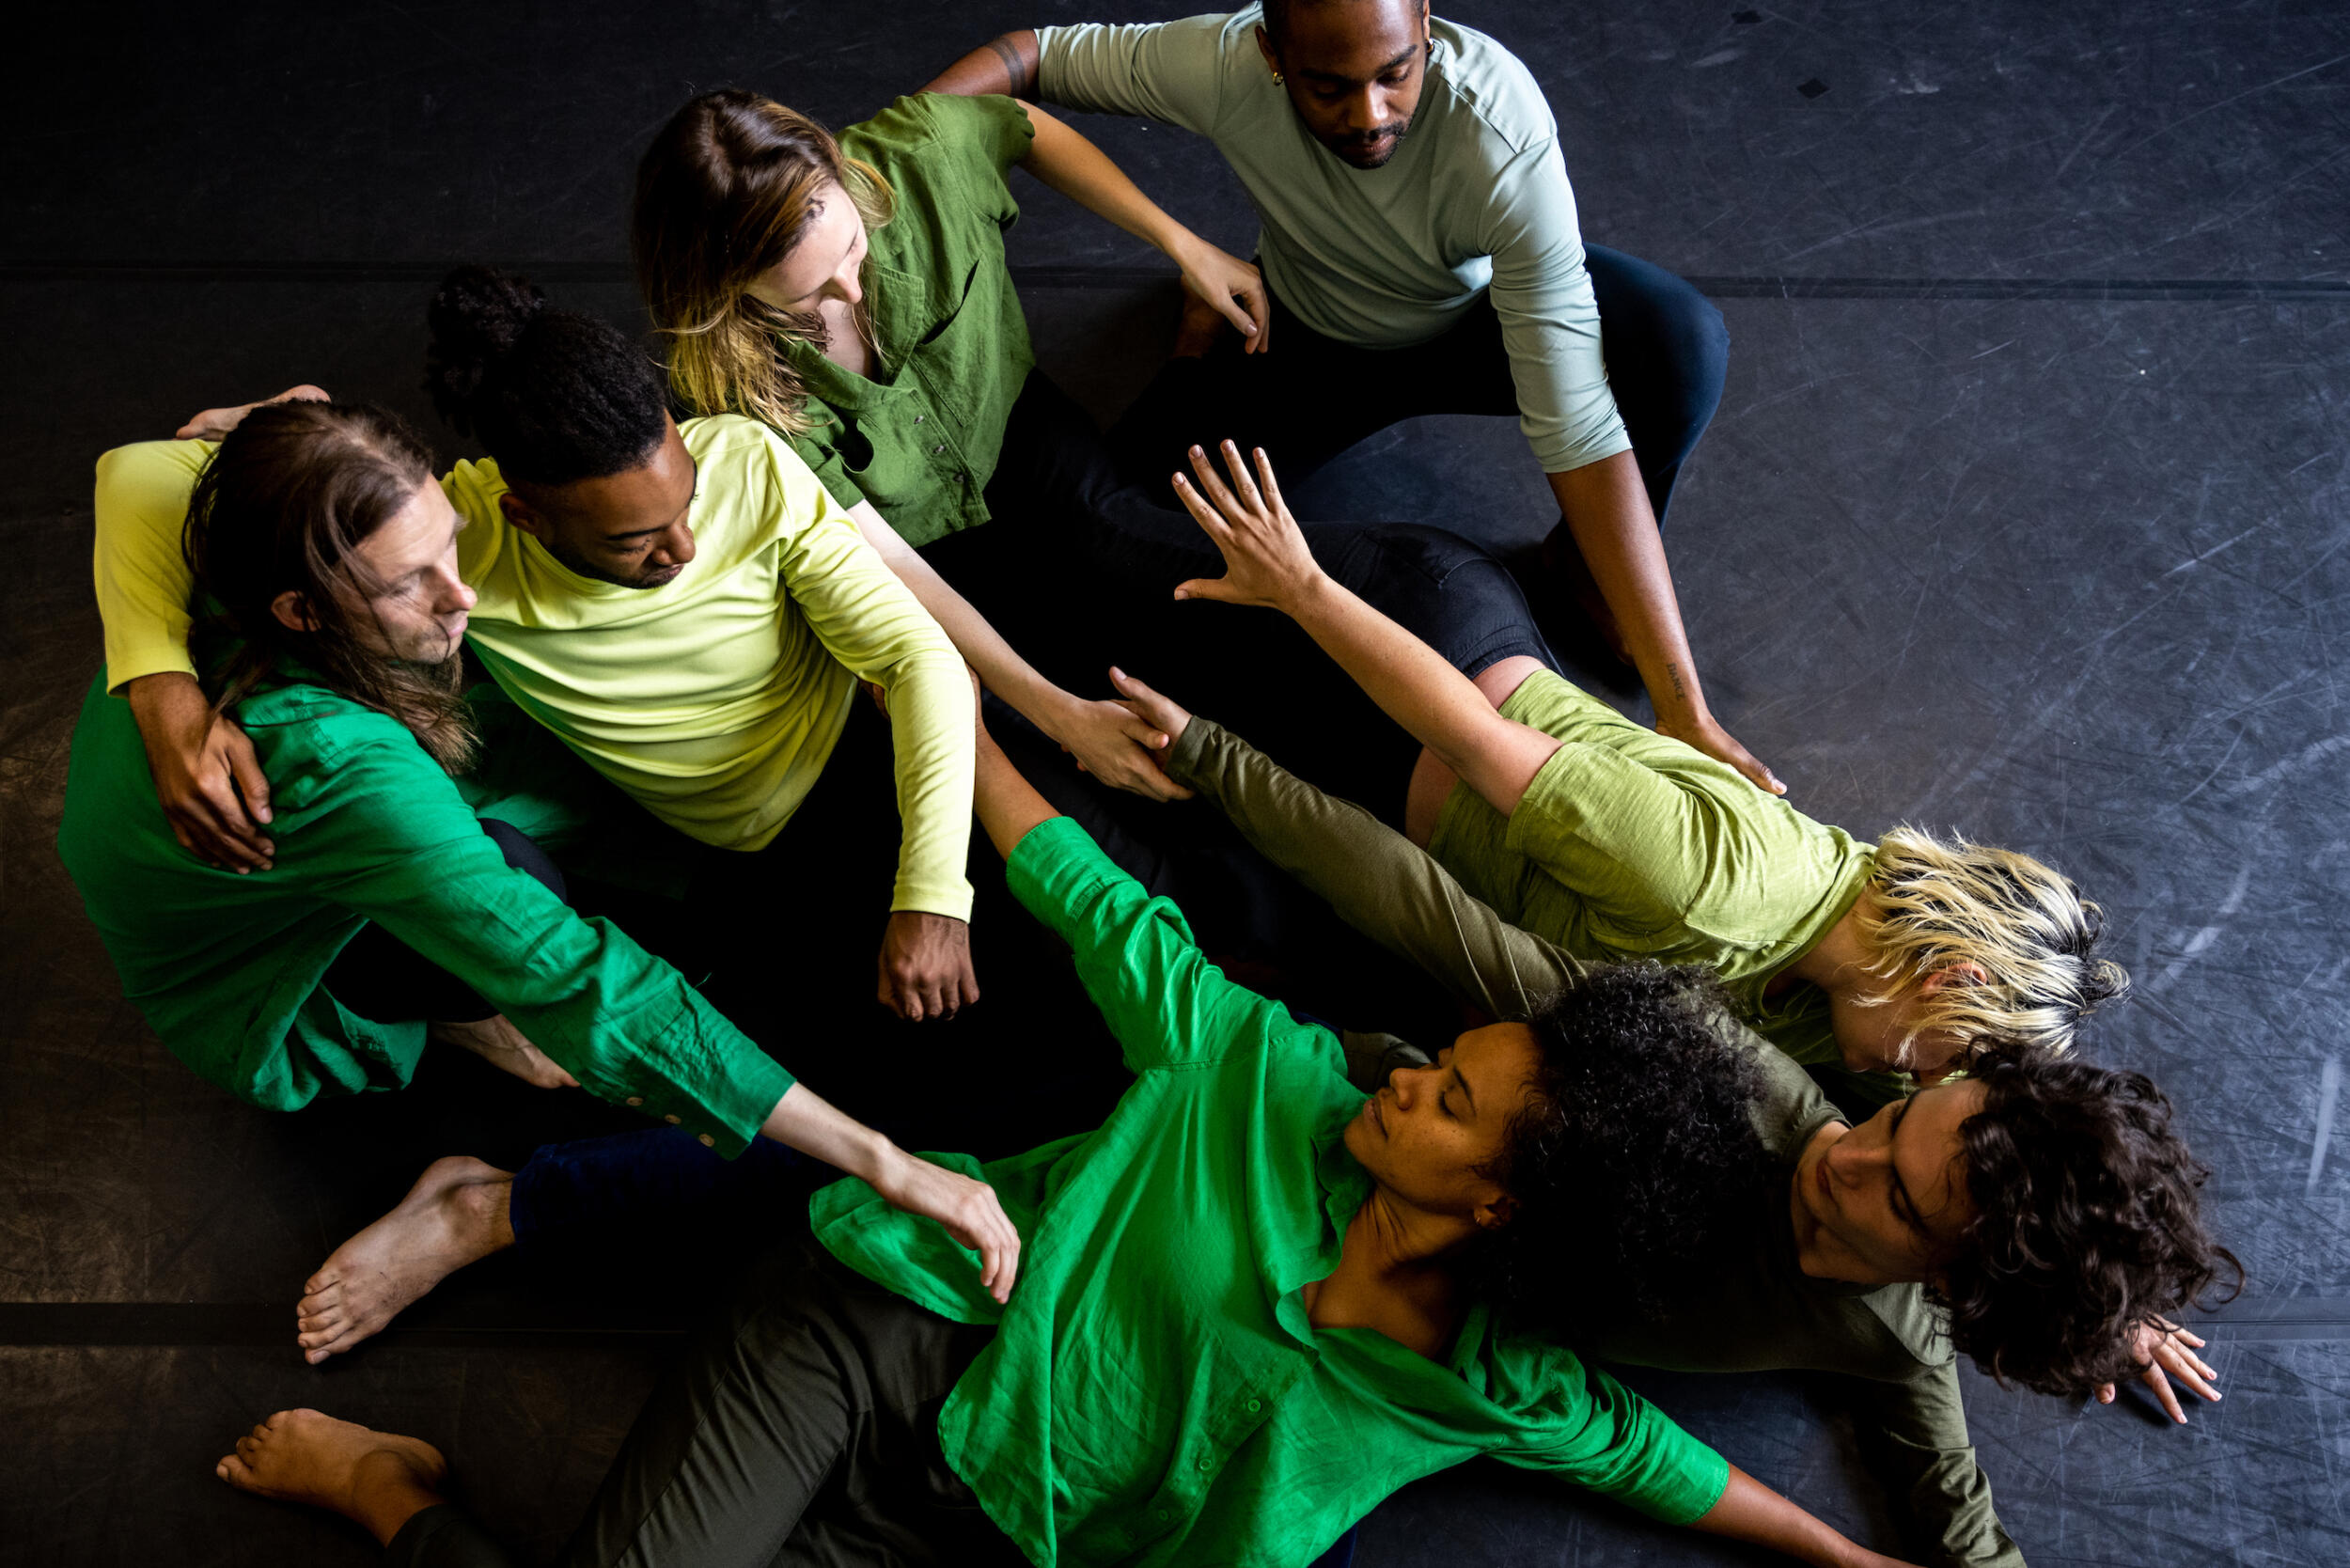 A photograph of a pile of dancers reaching for one another. They wear shirts in varying shades of green.